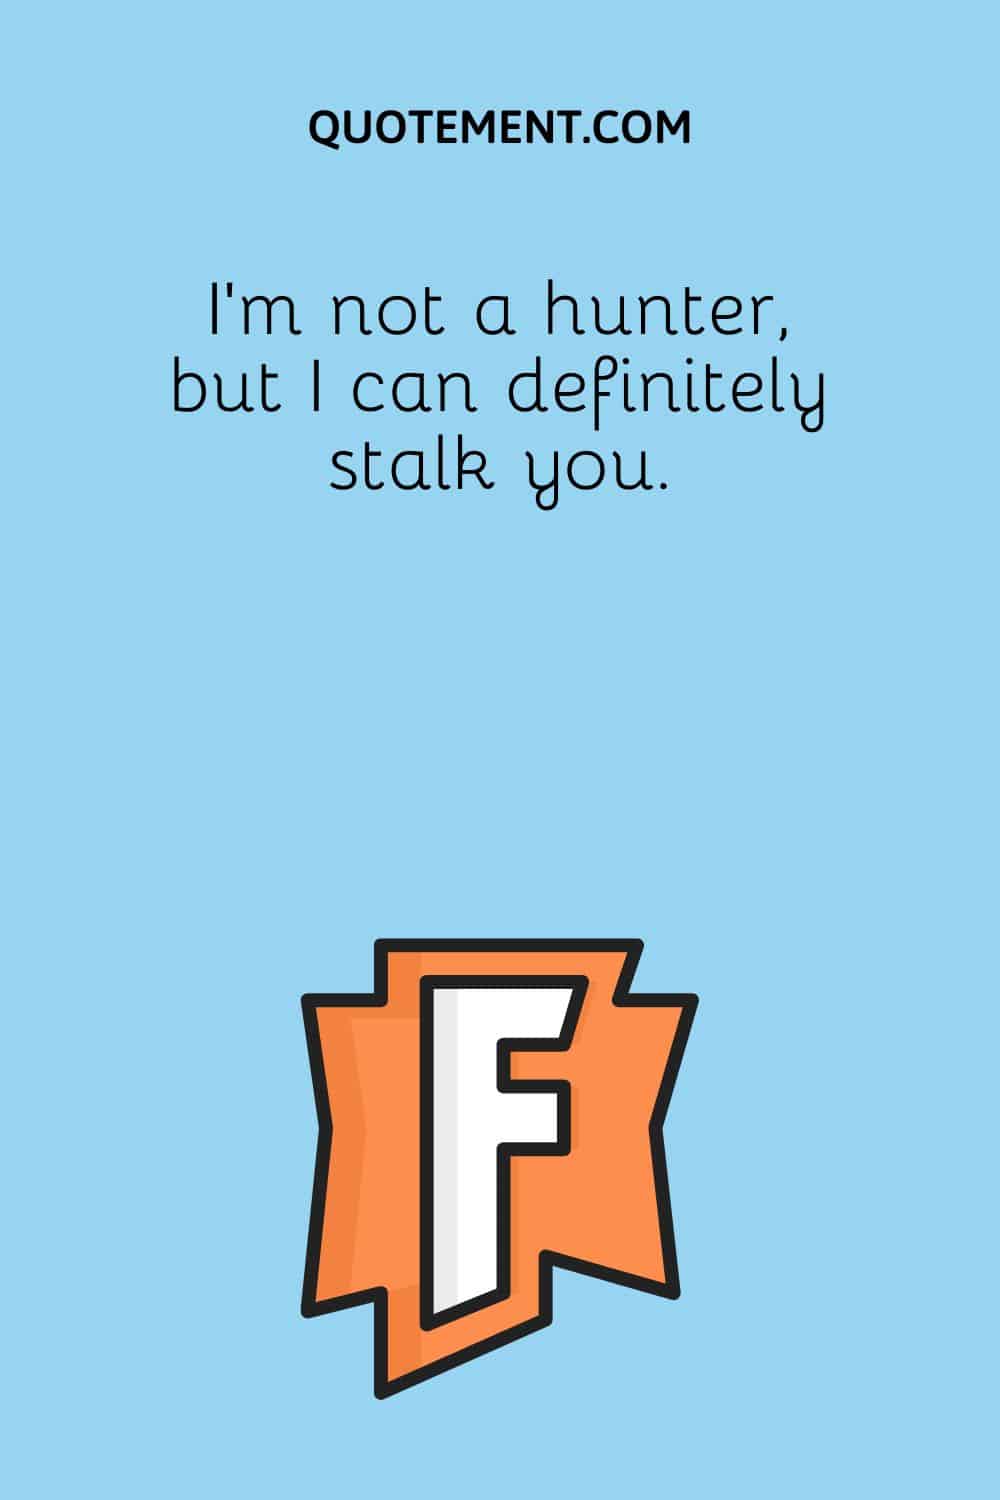 I'm not a hunter, but I can definitely stalk you